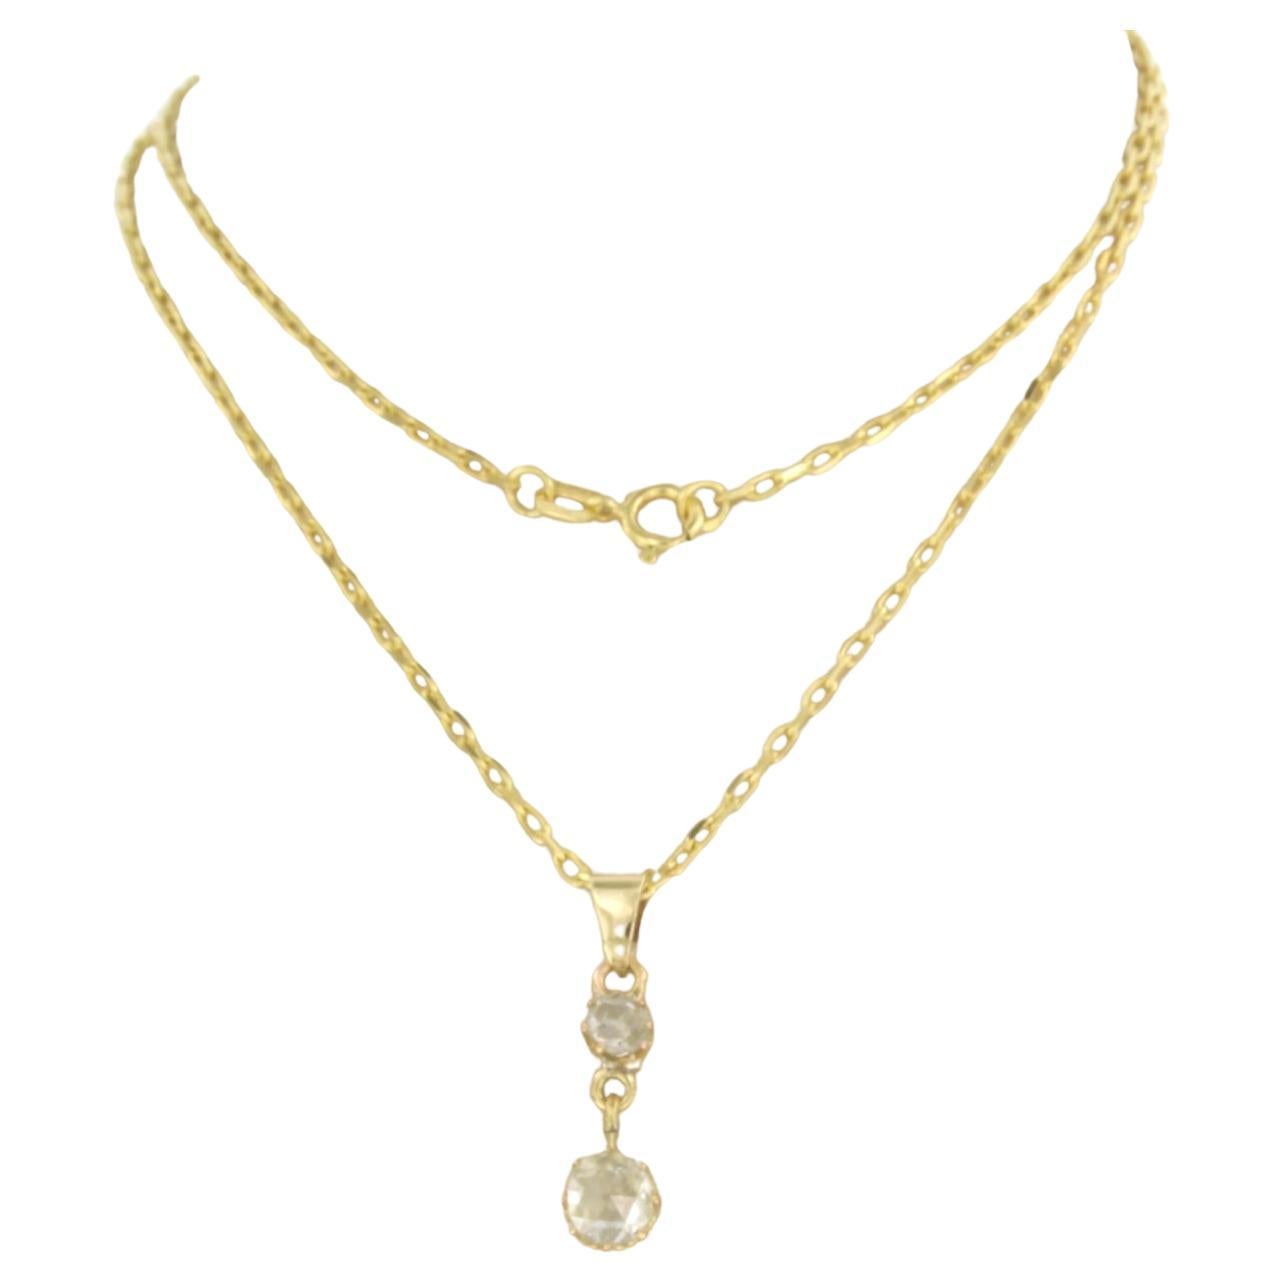 Necklace and pendant set with rose diamonds up to 0.70ct 14k yellow gold